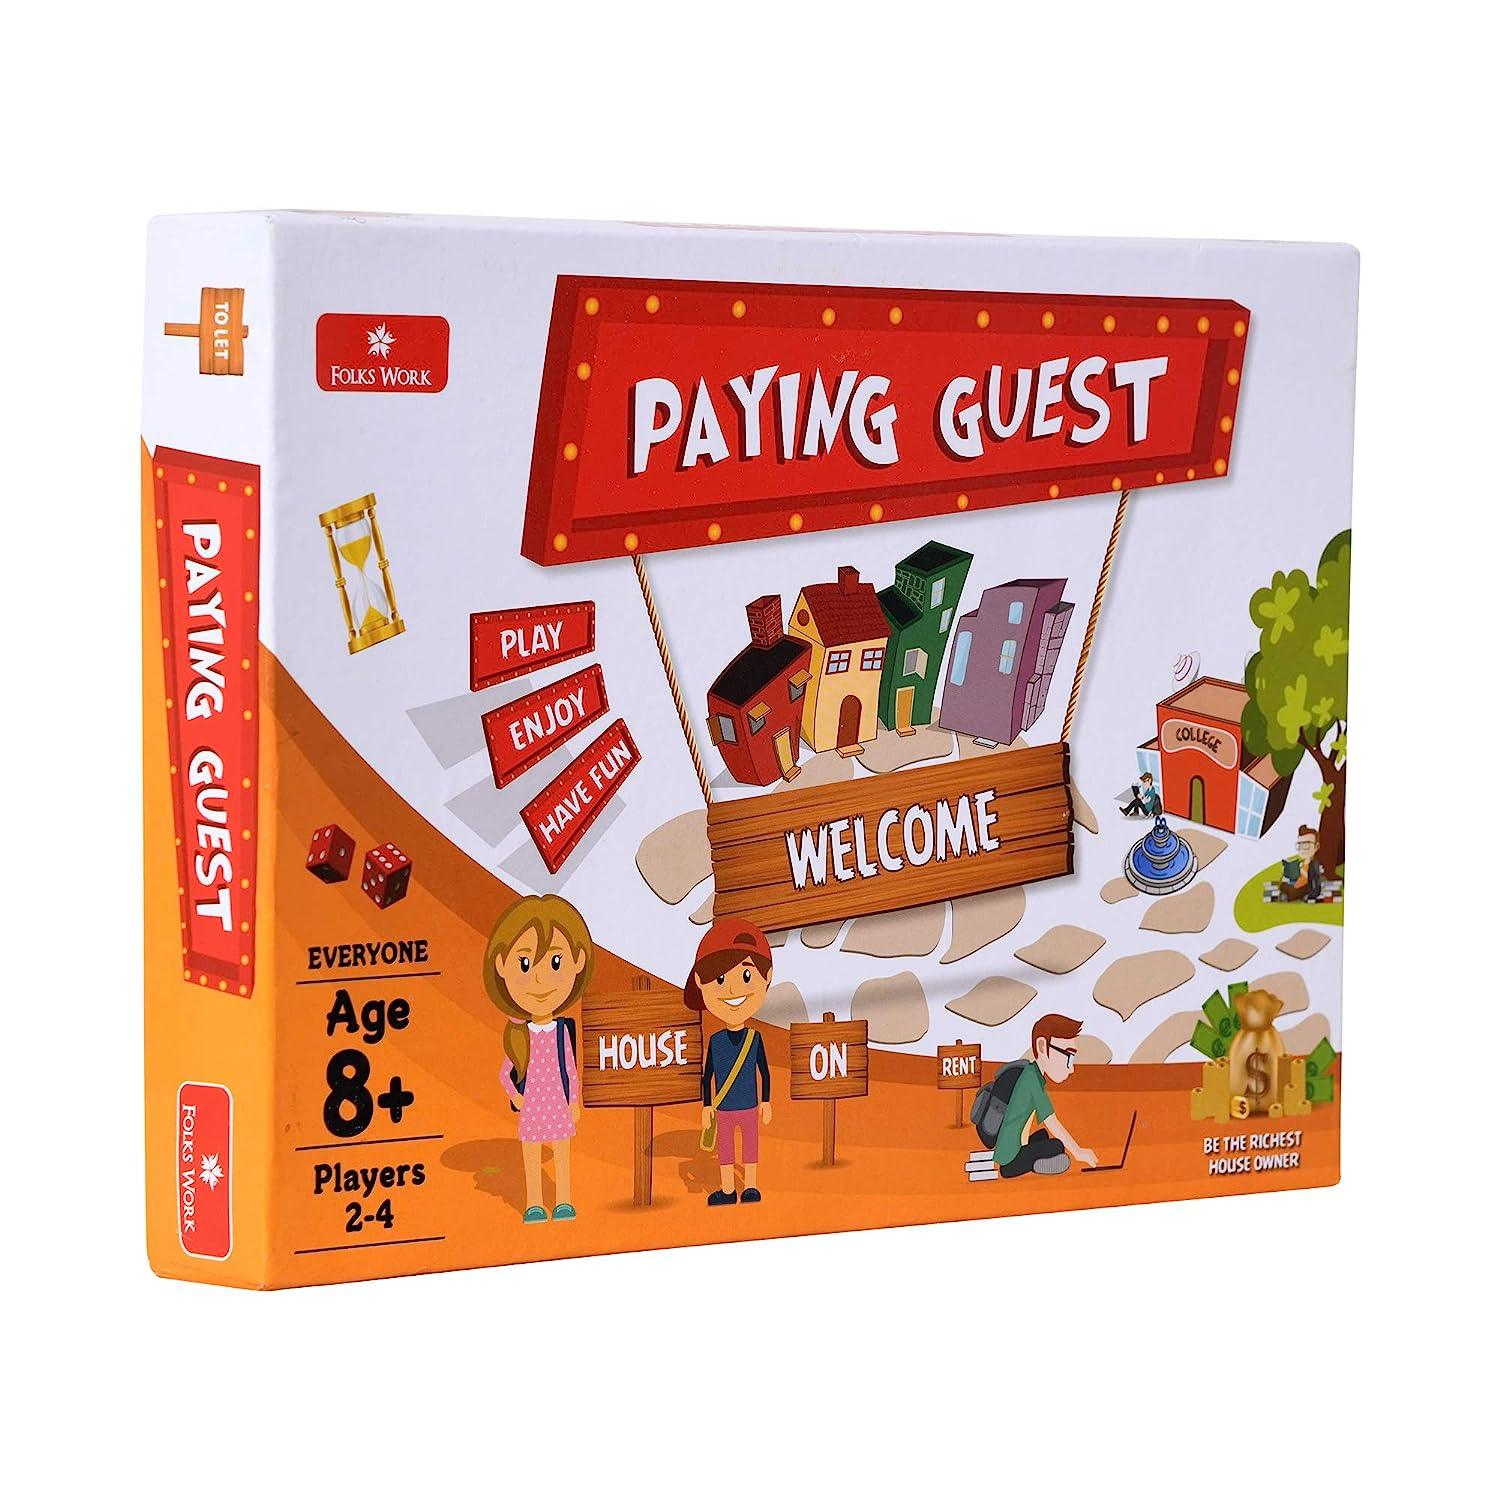 Playing Guest Toy Game for Kids